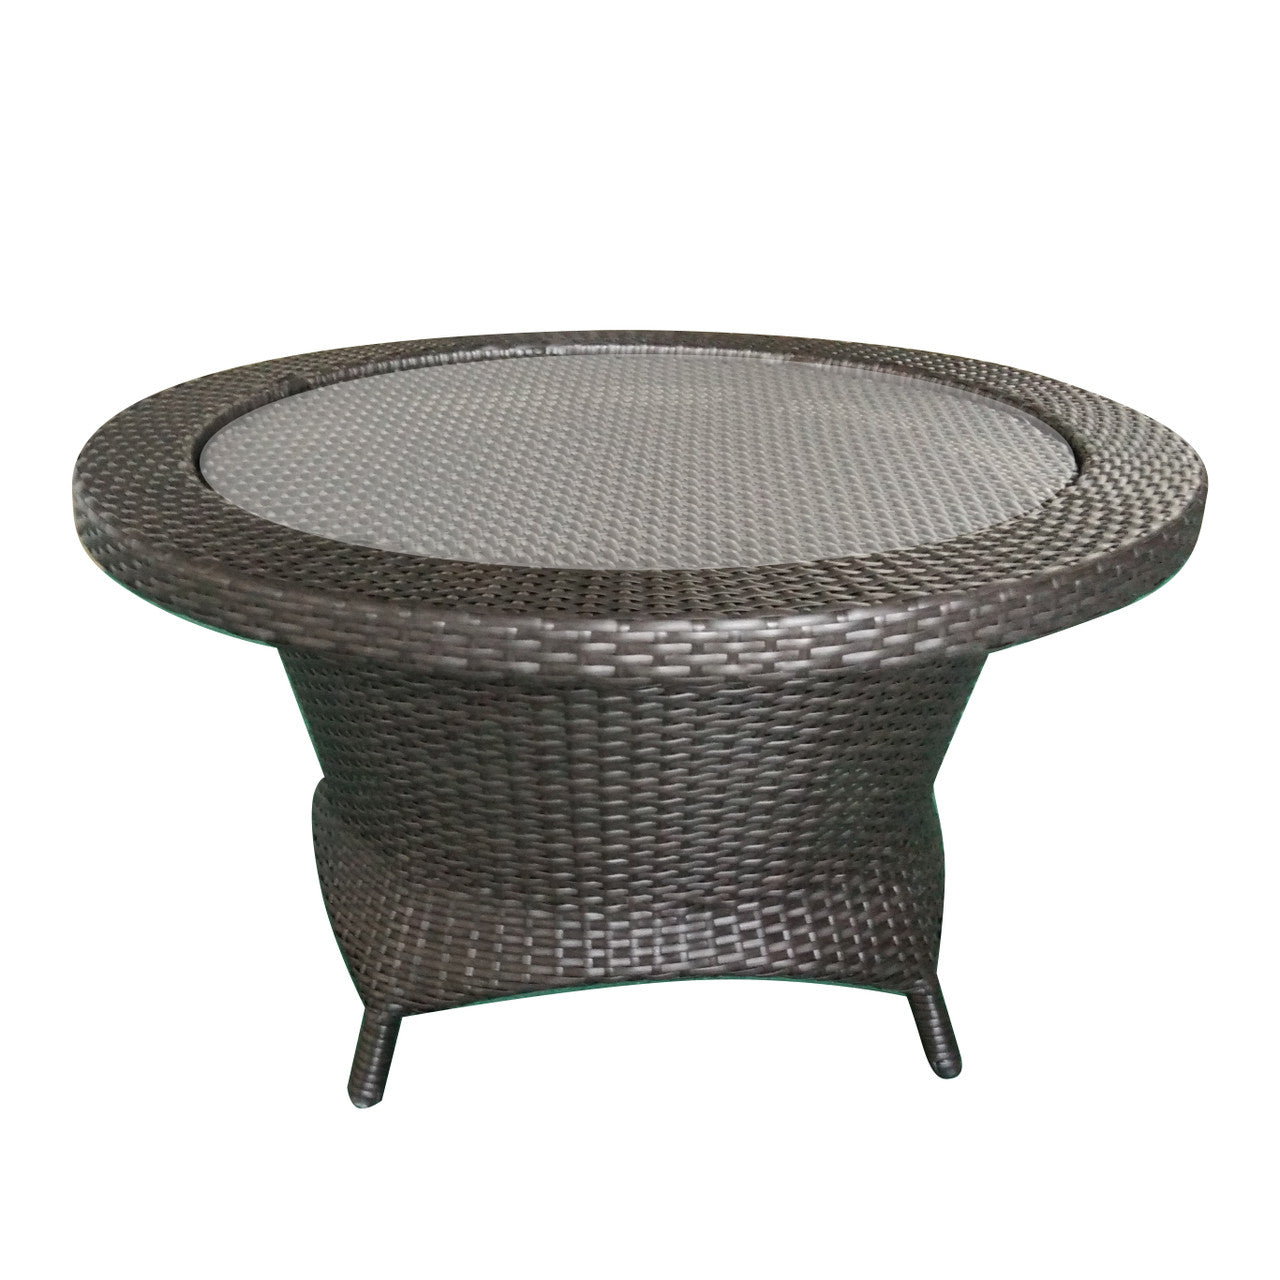 Forever Patio Universal Woven Rotating Chat Table - Flat Weave